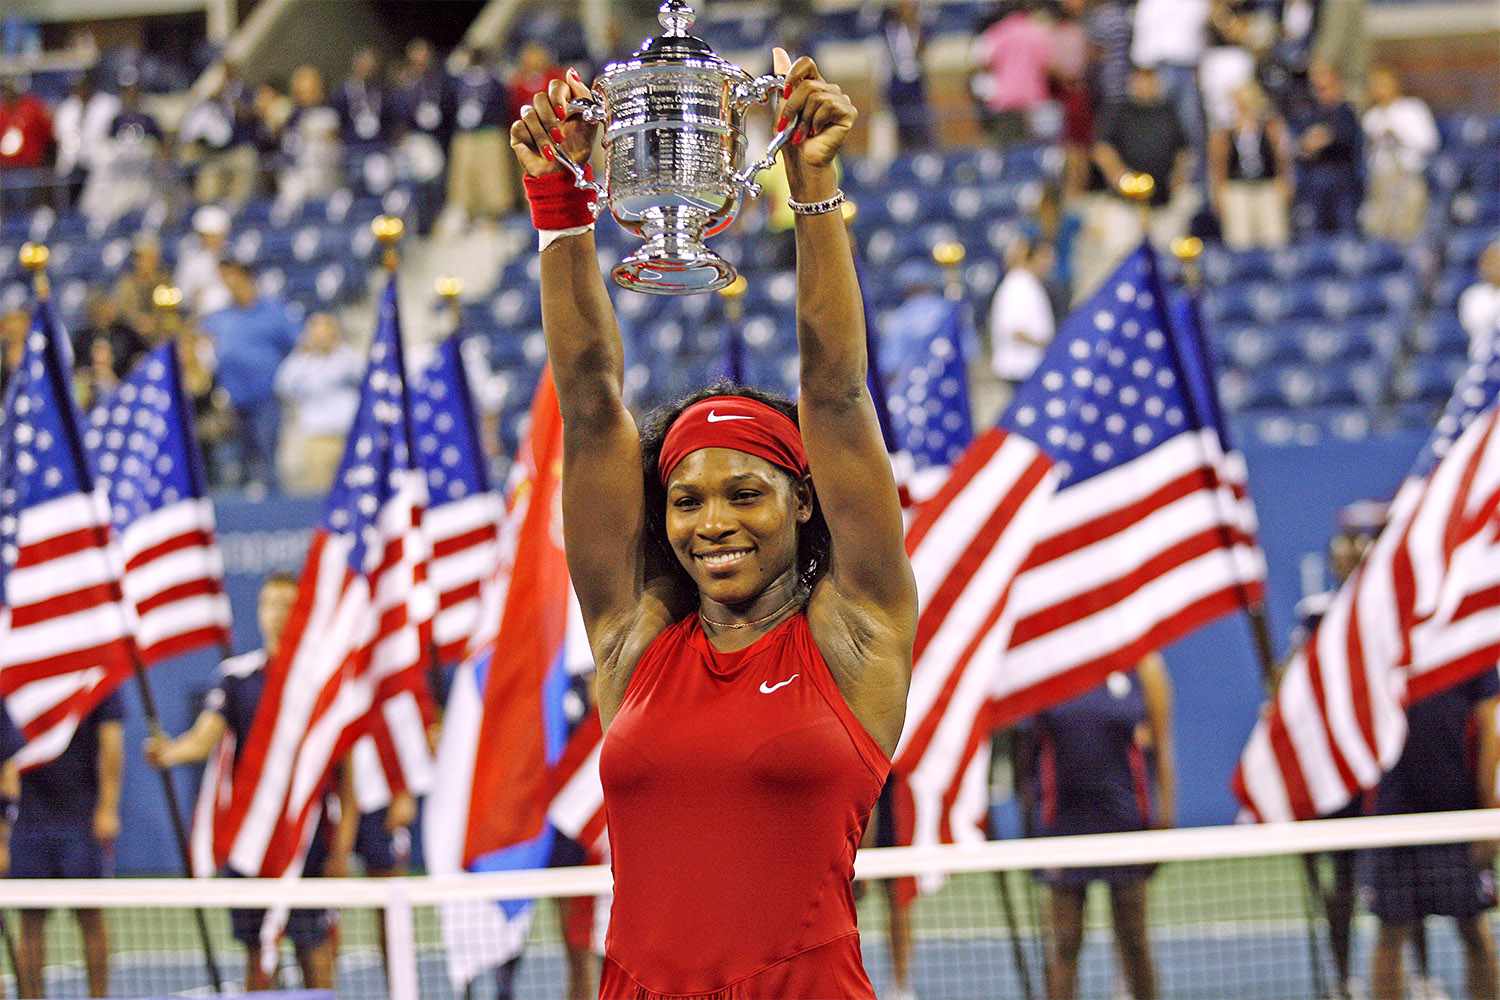 Tennis: US Open: USA Serena Williams victorious with trophy after Women's Final vs Serbia Jelena Jankovic at National Tennis Center. Flushing, NY 9/7/2008 CREDIT: Manny Millan (Photo by Manny Millan /Sports Illustrated via Getty Images) (Set Number: X81024 TK7 R15 F131 )